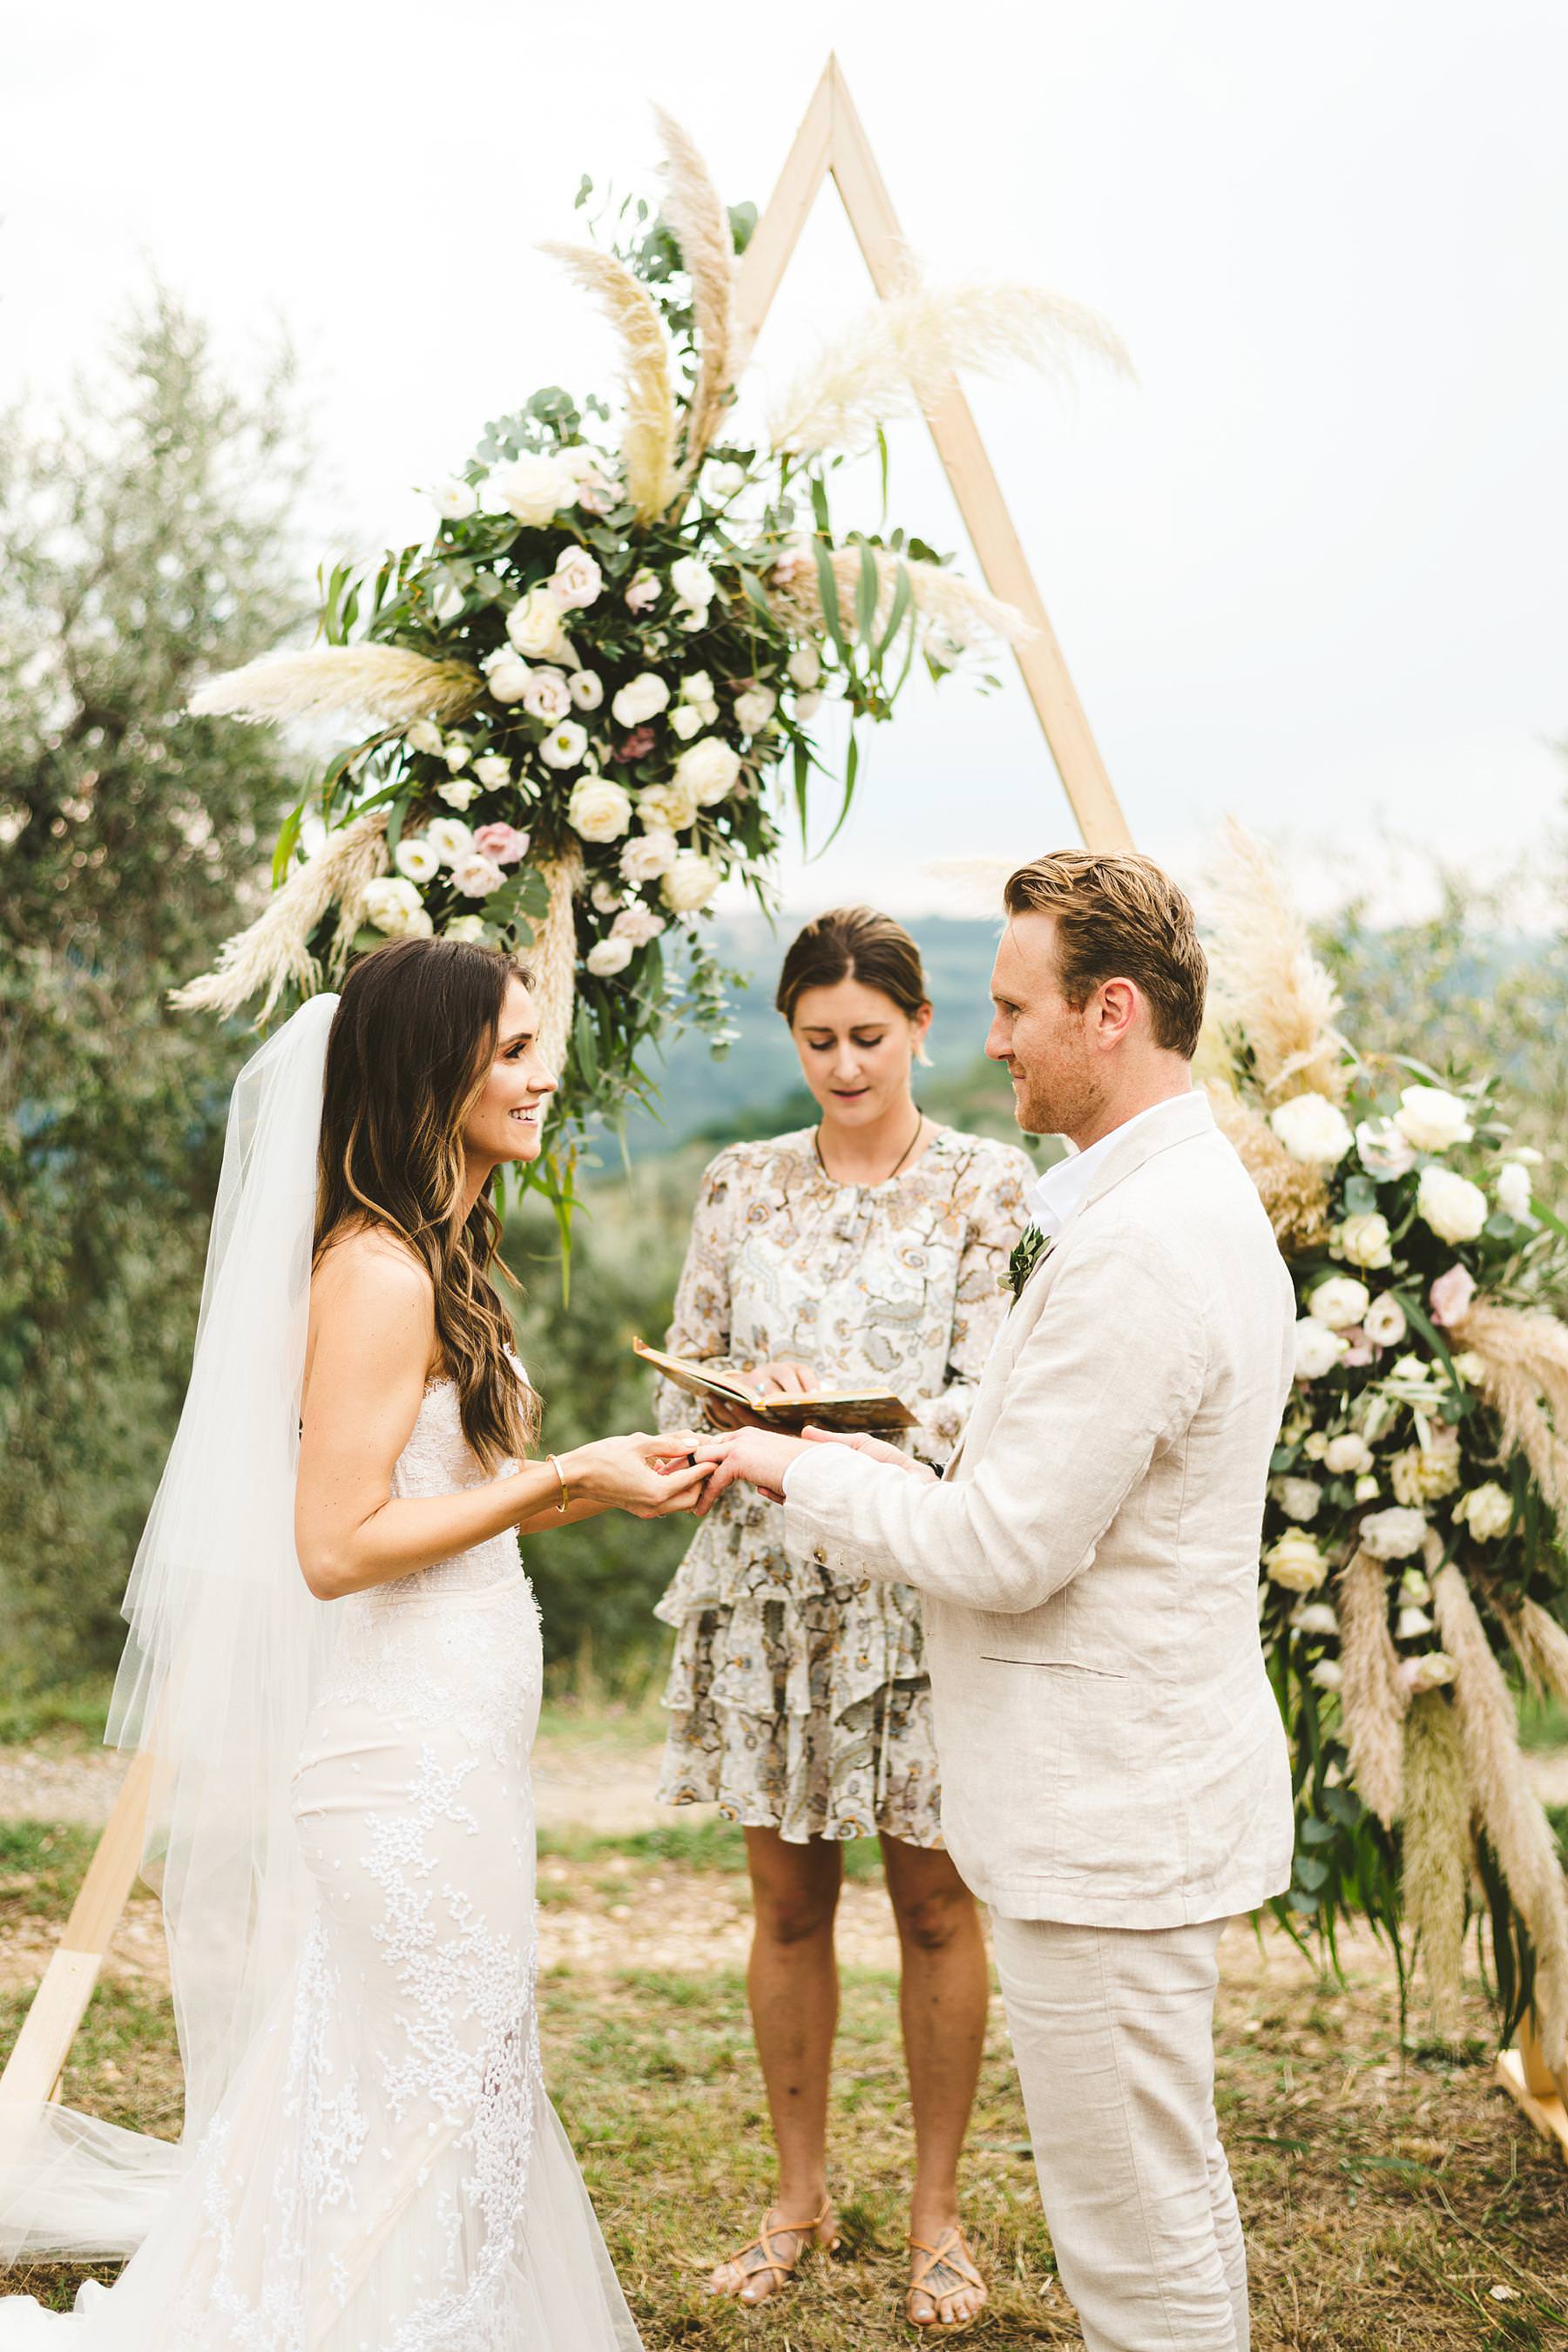 Lovely outdoor symbolic wedding ceremony decor with triangular shape as a stunning frame that witnessed bride and groom promises of love. Modern and unusual wedding framed by the olive groves of Chianti